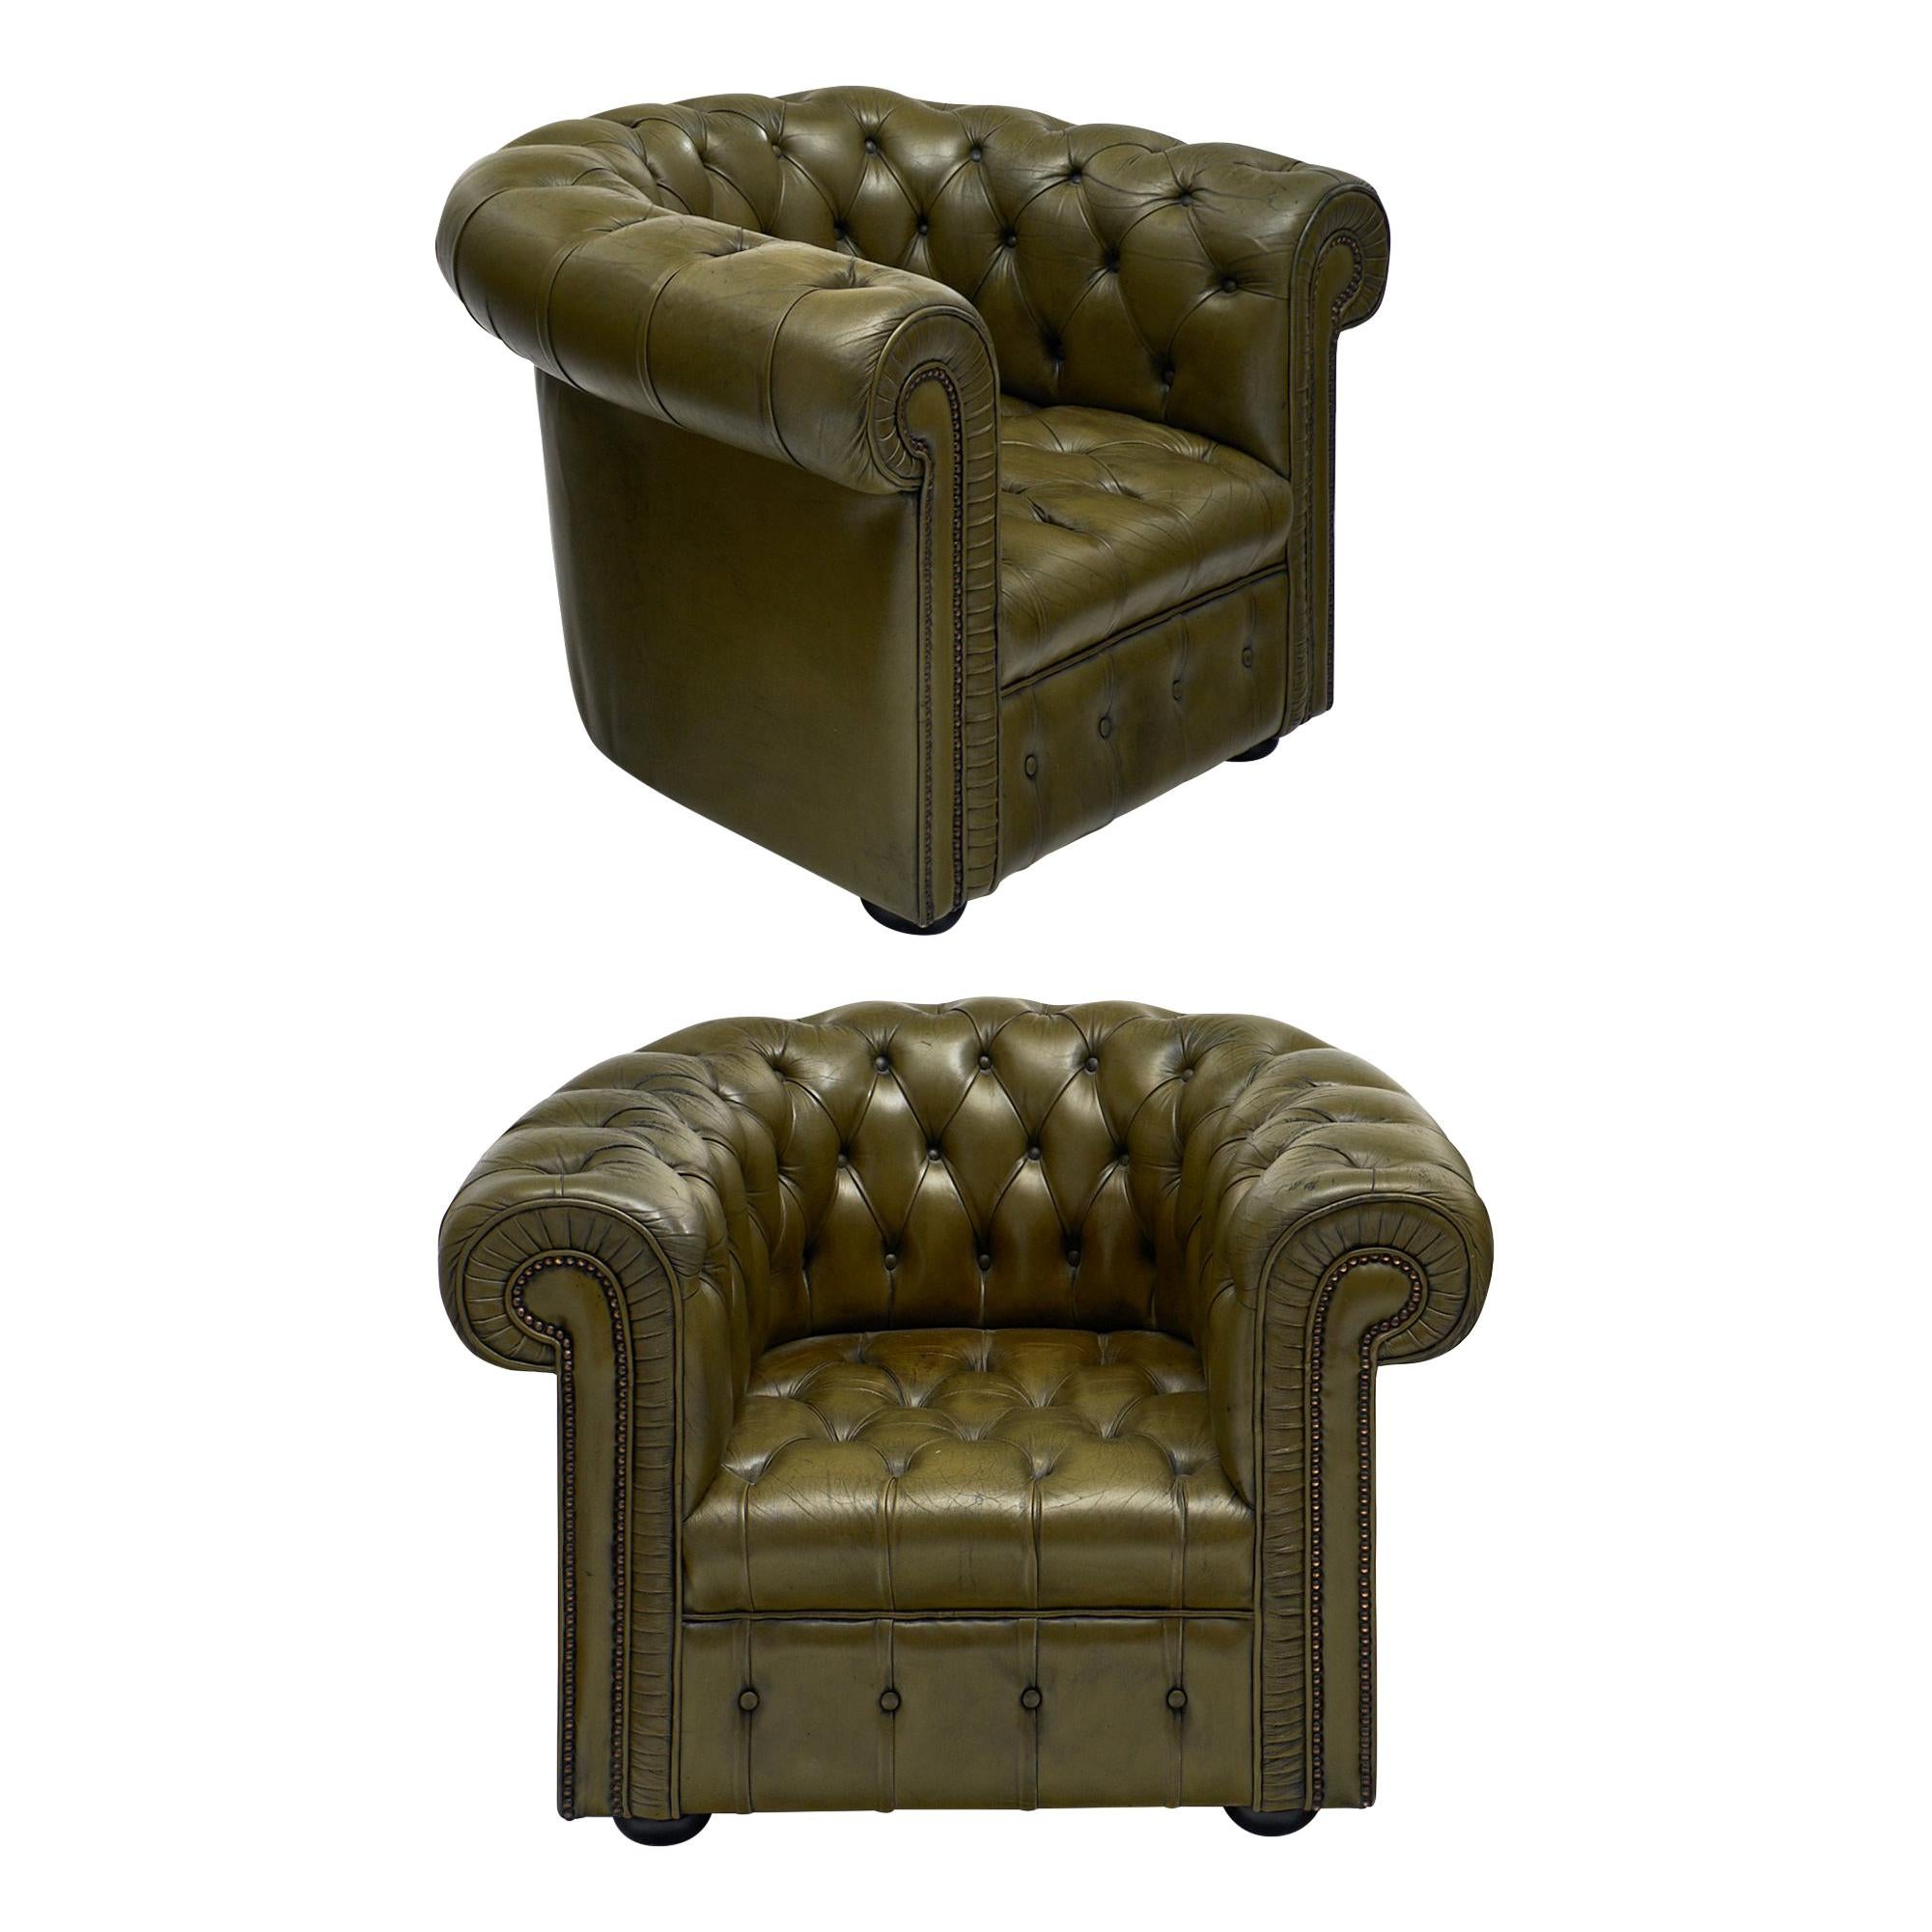 Pair of Vintage Green Chesterfield Club Chairs